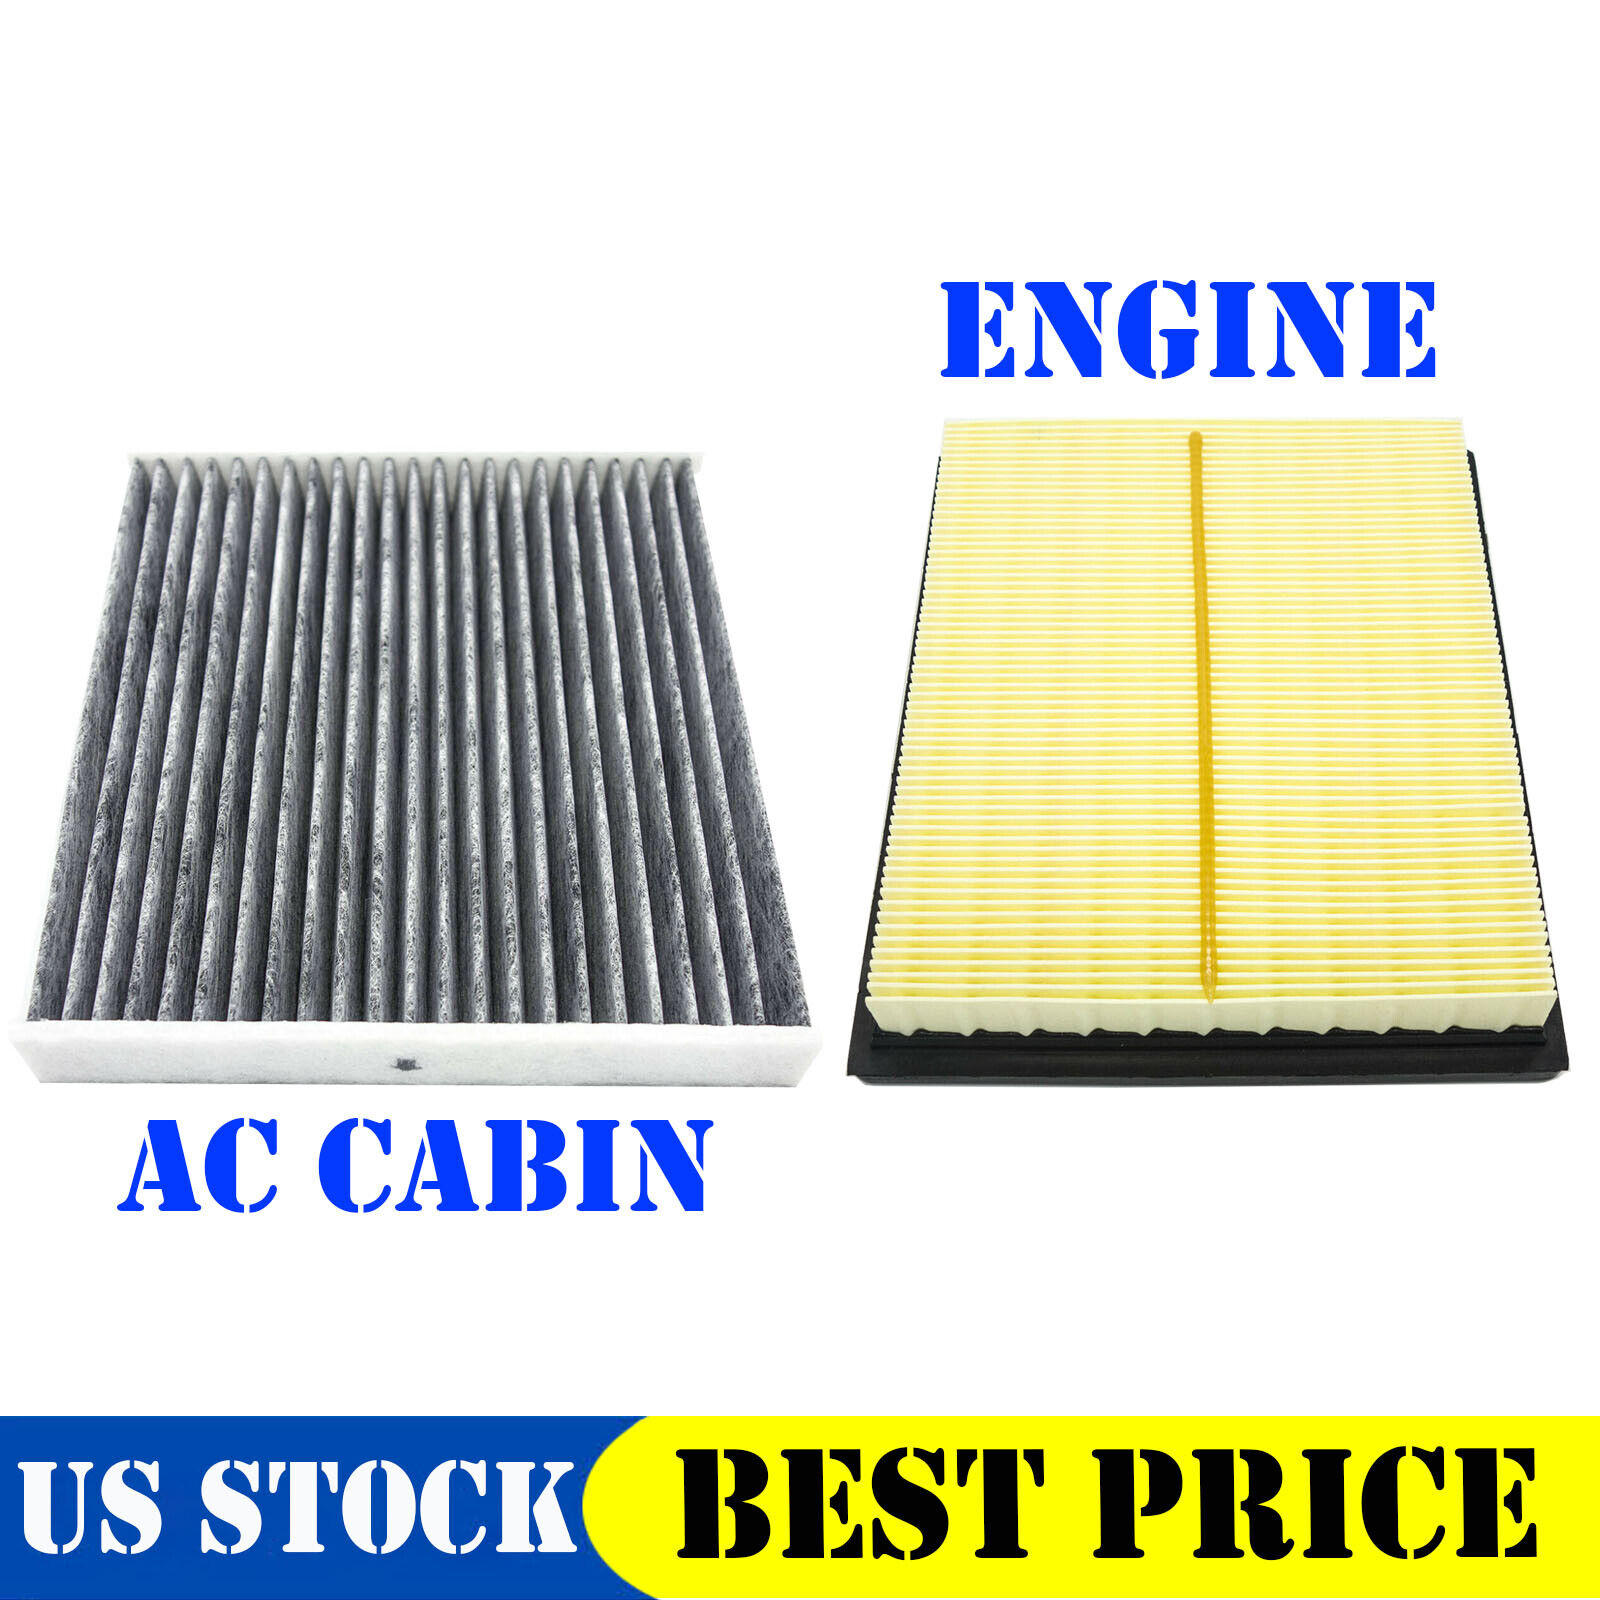 NEW Set Engine & Cabin Air Filter For PRIUS CT200H NX300h 17801-37020 C35667